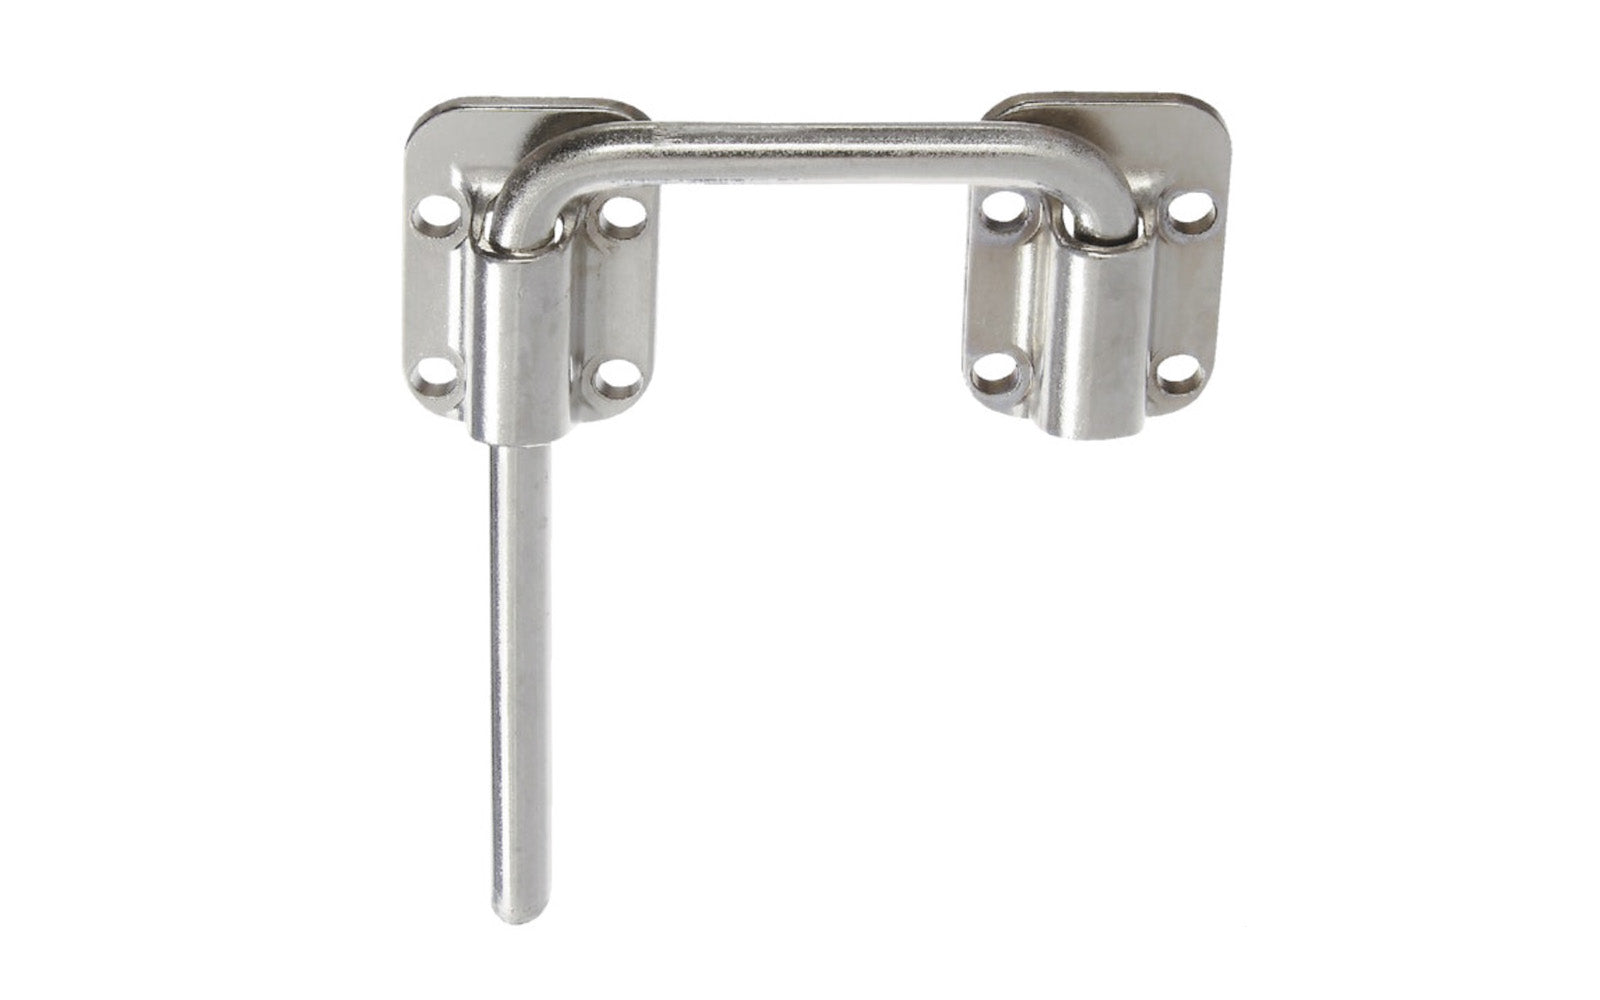 This 2-1/2" Nickel Plated Sliding Latch is designed to secure metal or wood sliding doors. Product features a long extension bar that allows product to reach over moldings, trims, etc. National Catalog Model N238-998. 038613238992